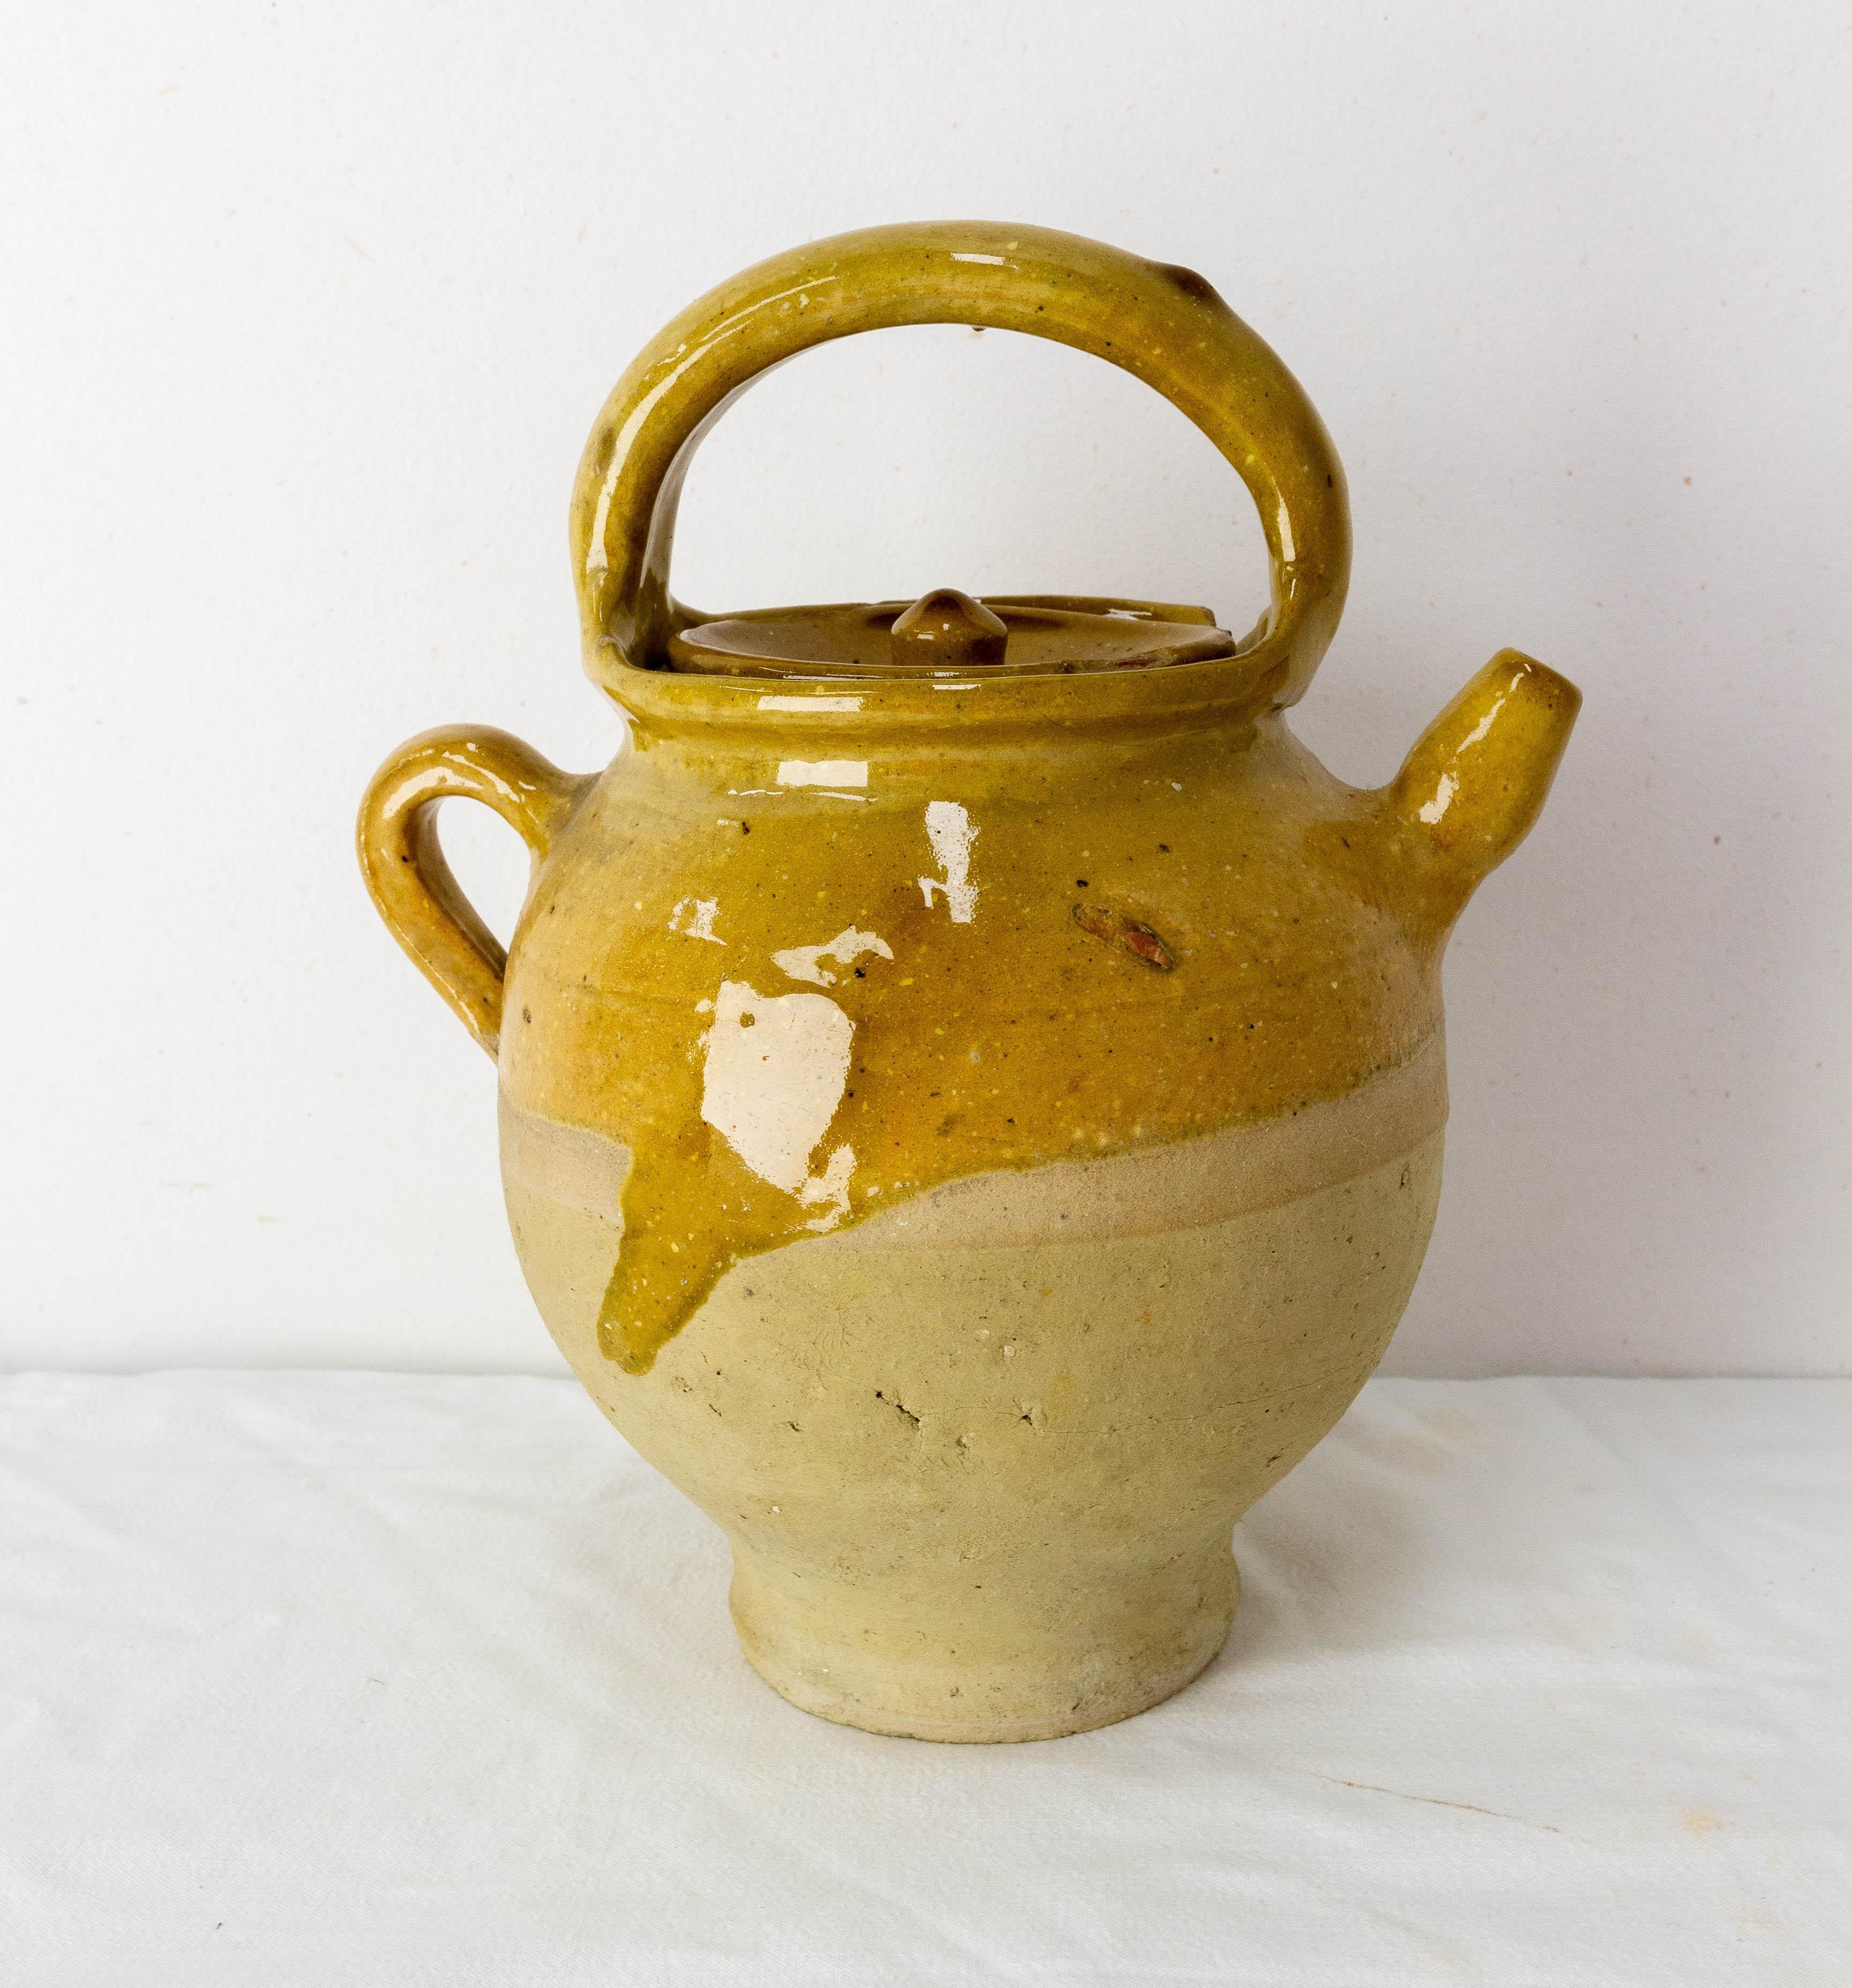 Terracotta jug with yellow glaze. This kind of pitcher was used to keep the water fresh, at a time when electricity did not exist.
Very decorative.
Good patina and bright yellow color.
Good antique condition with a small splinter on the collar,